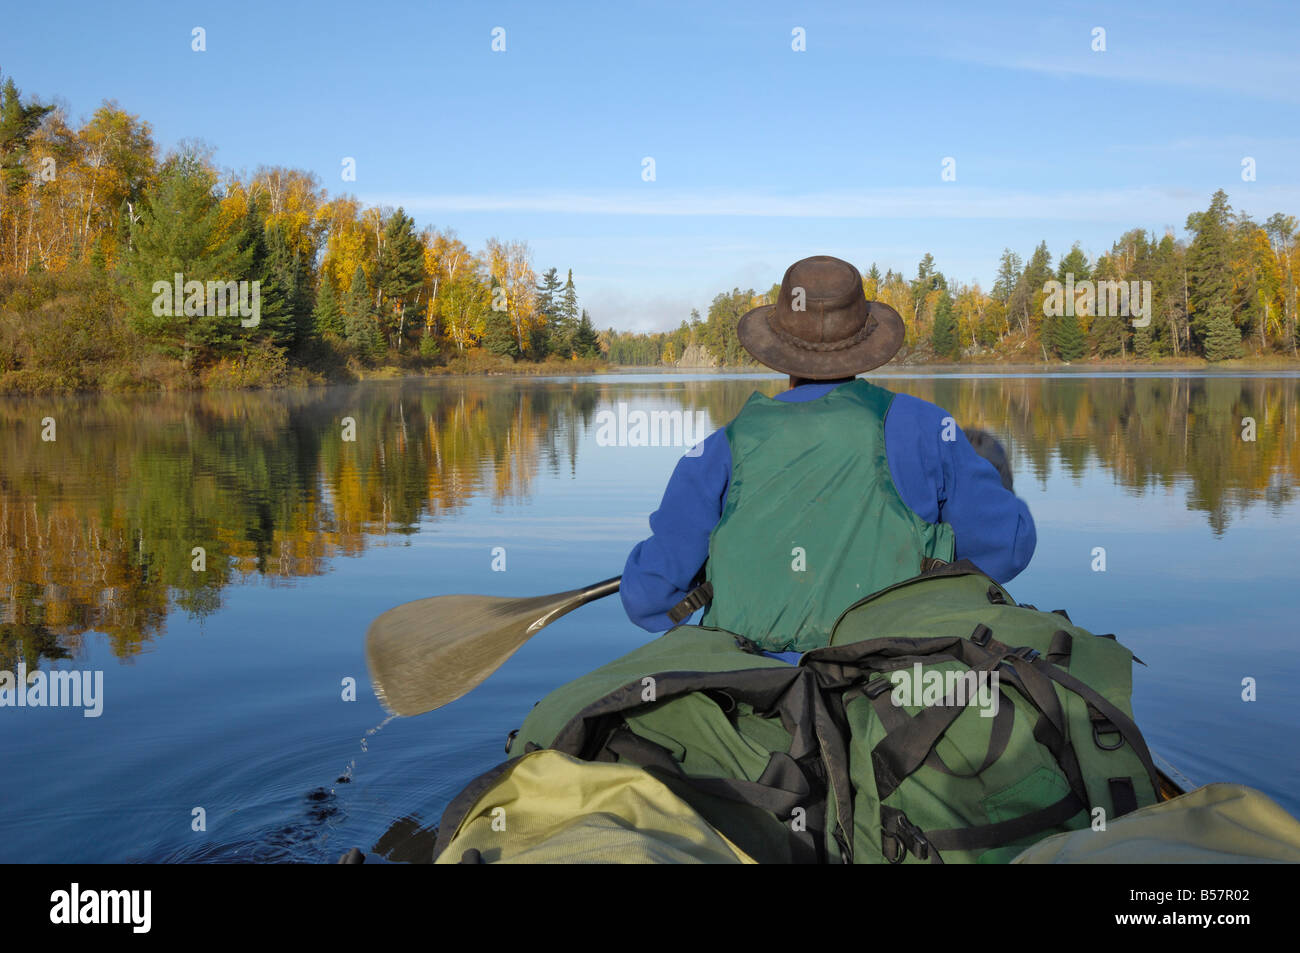 Canoeing on Hoe Lake, Boundary Waters Canoe Area Wilderness, Superior National Forest, Minnesota, United States of America Stock Photo